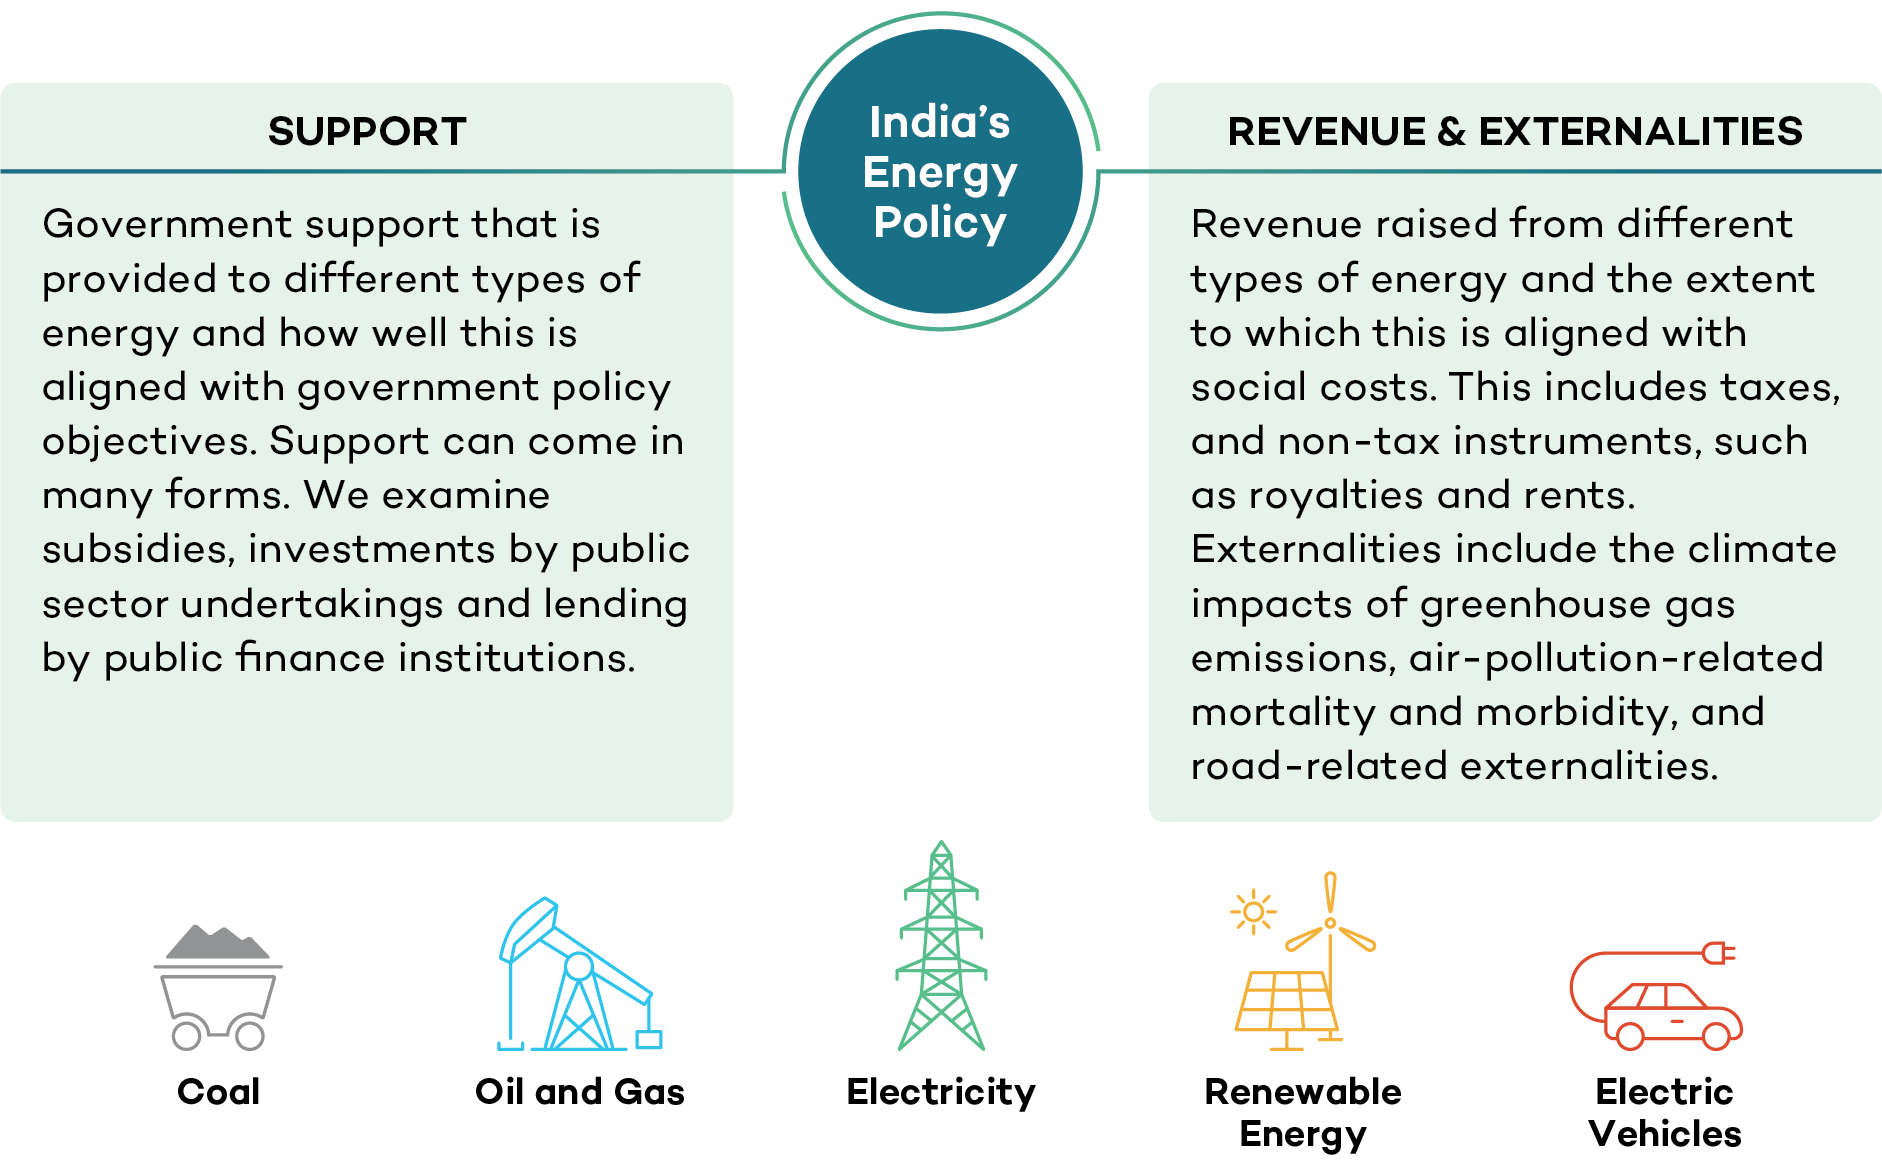 Framework used to assess India’s energy policy budgeting